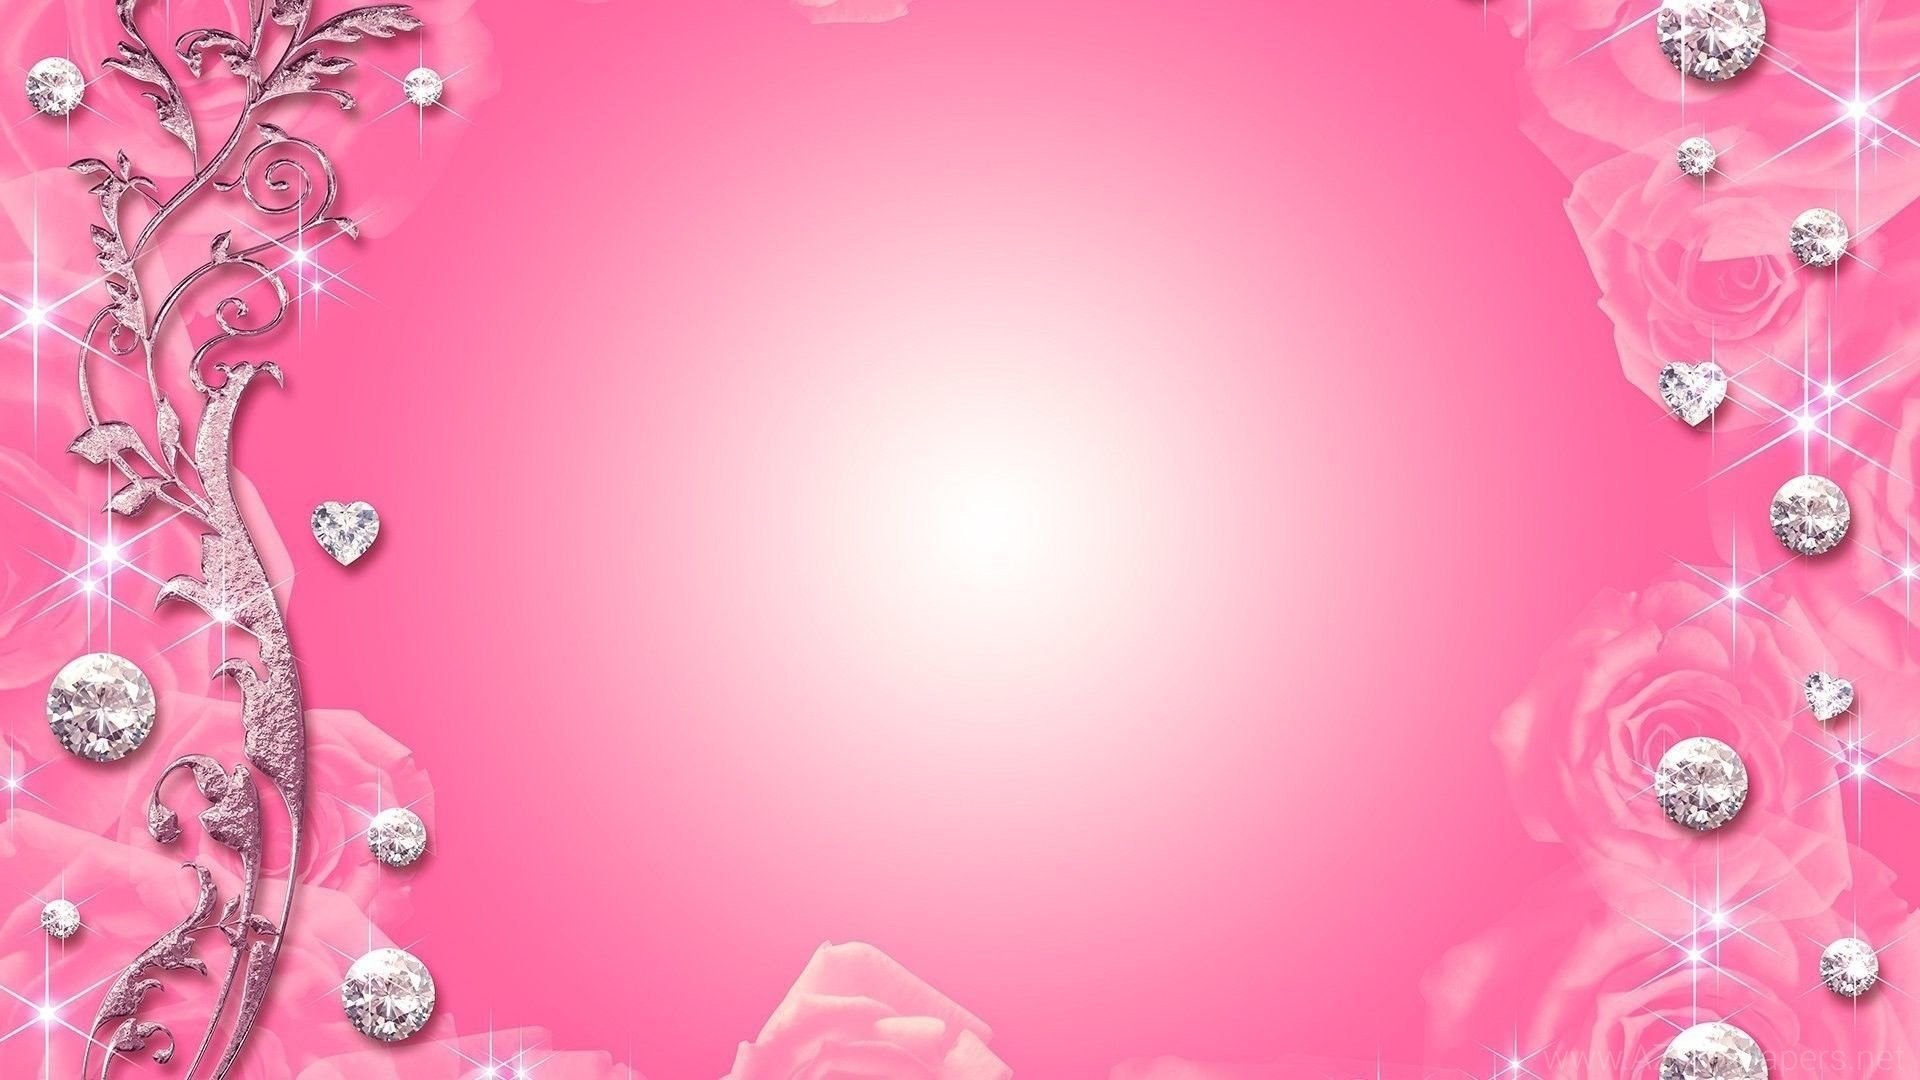 1920x1080 Love Pink Vs Wallpaper Images With HD Wallpapers Kemecer.com